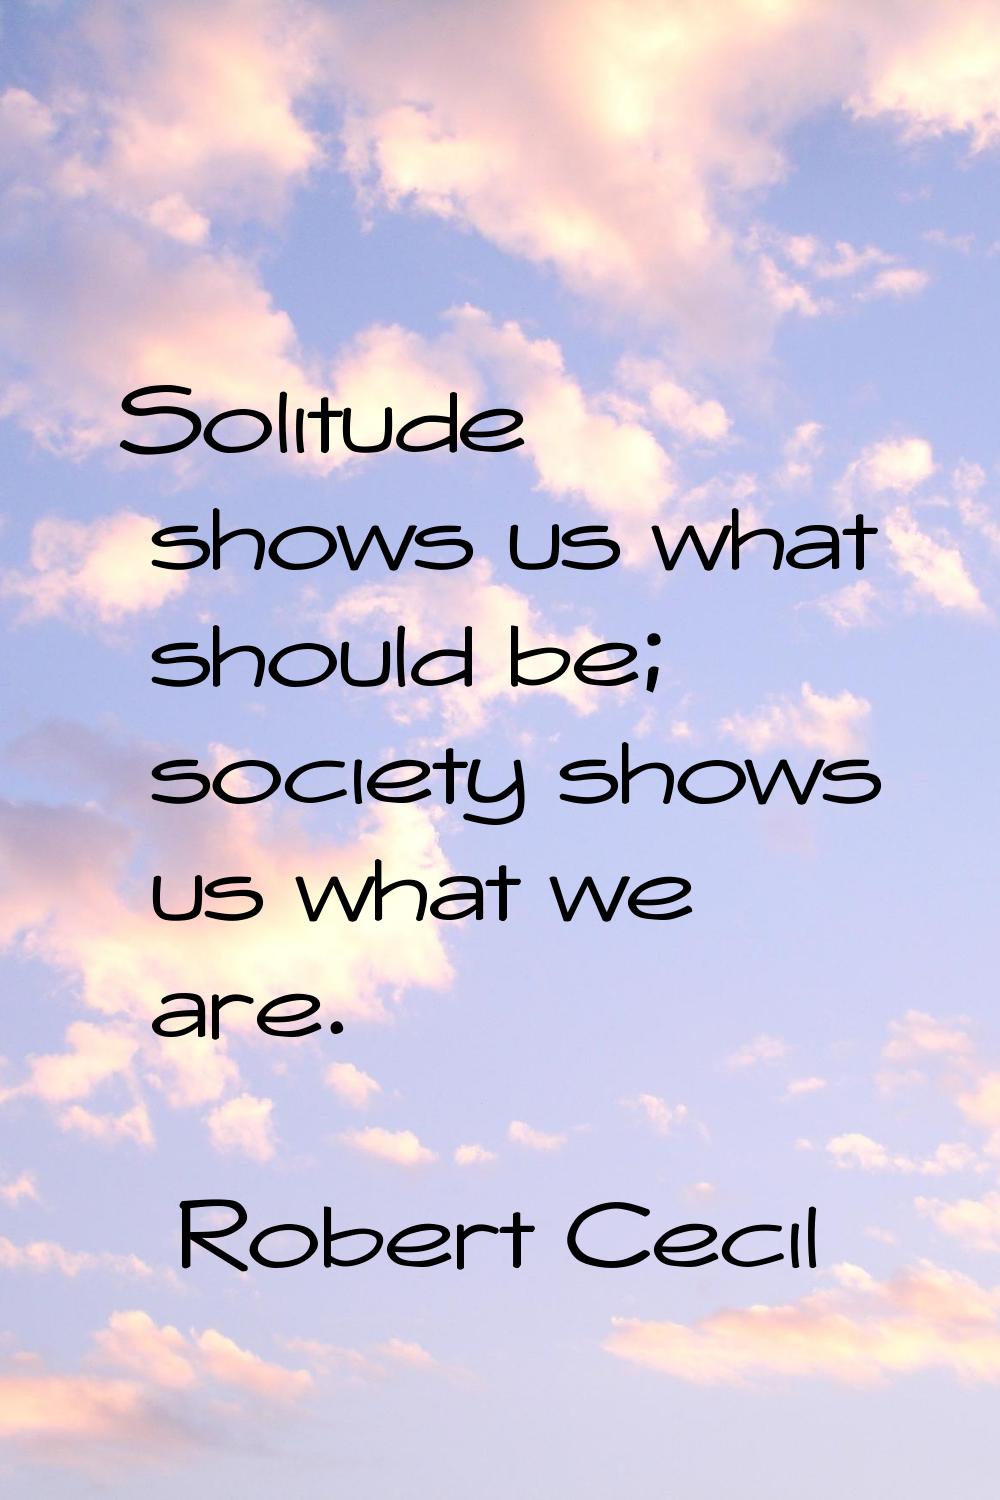 Solitude shows us what should be; society shows us what we are.